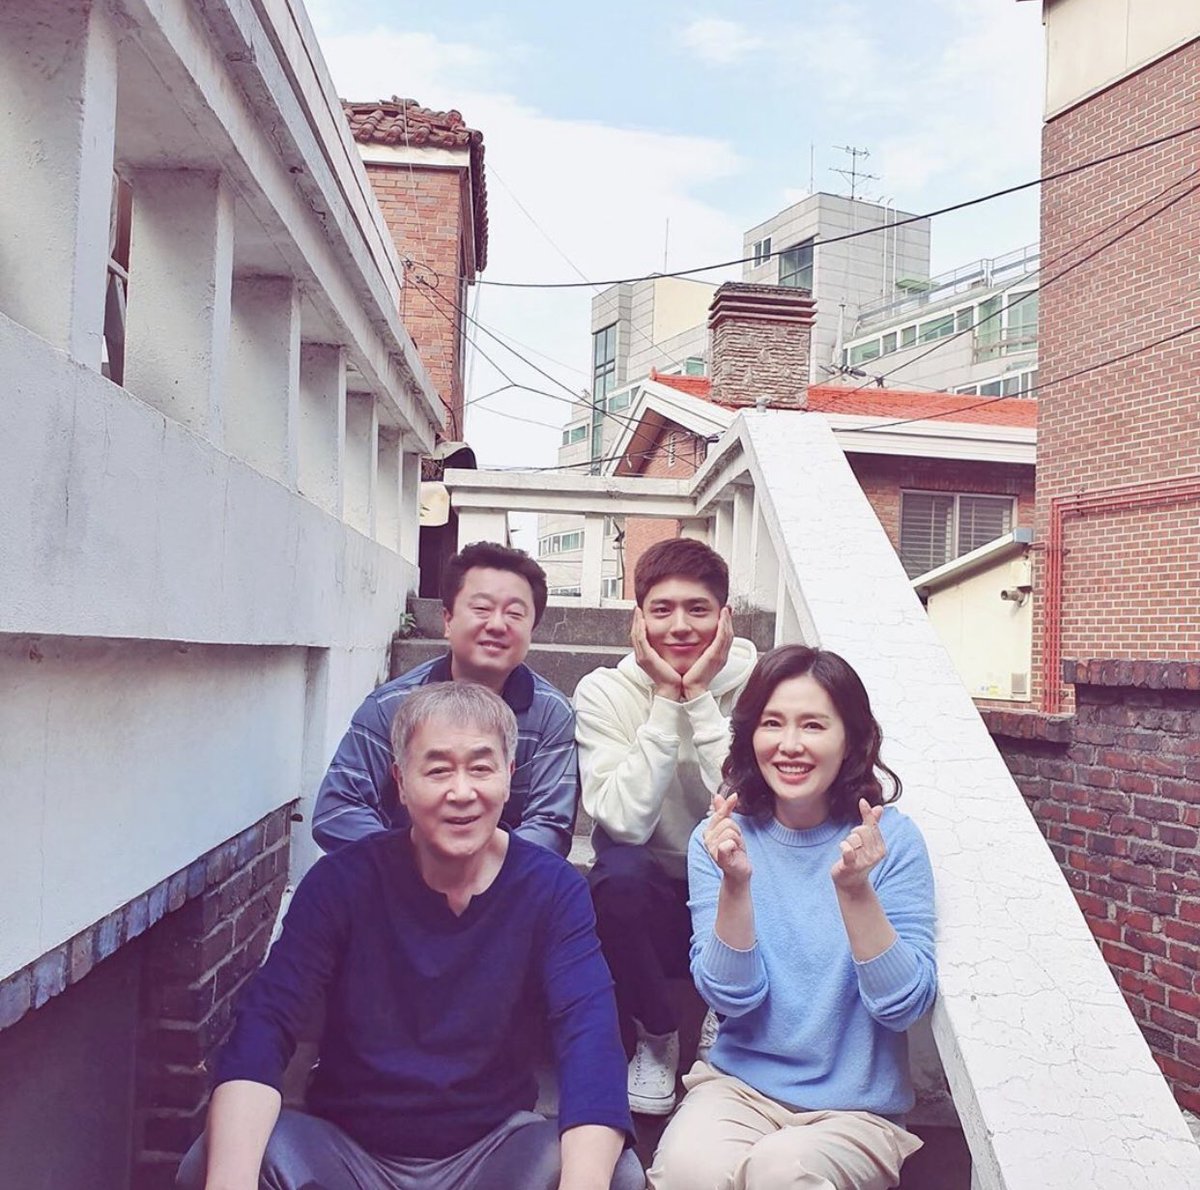 Sa Hye-joon and his cute family minus his big bro! love the warm vibes this family is giving  #청춘기록  #RecordOfYouth  #박보검  #ParkBoGum